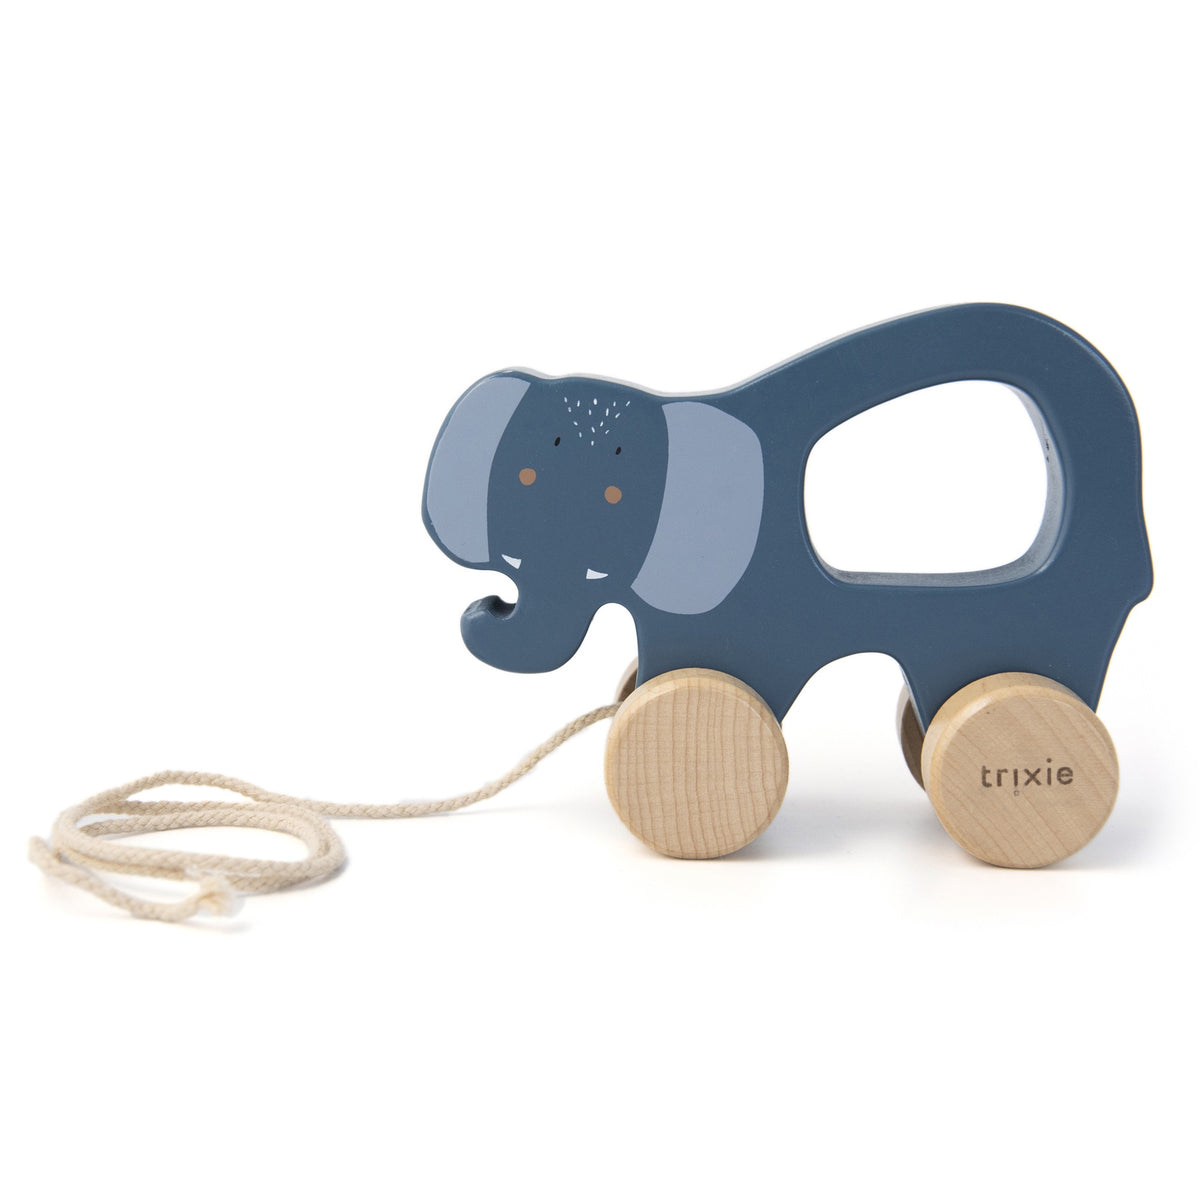 Trixie Wooden Pull Along Toy | Mrs. Elephant